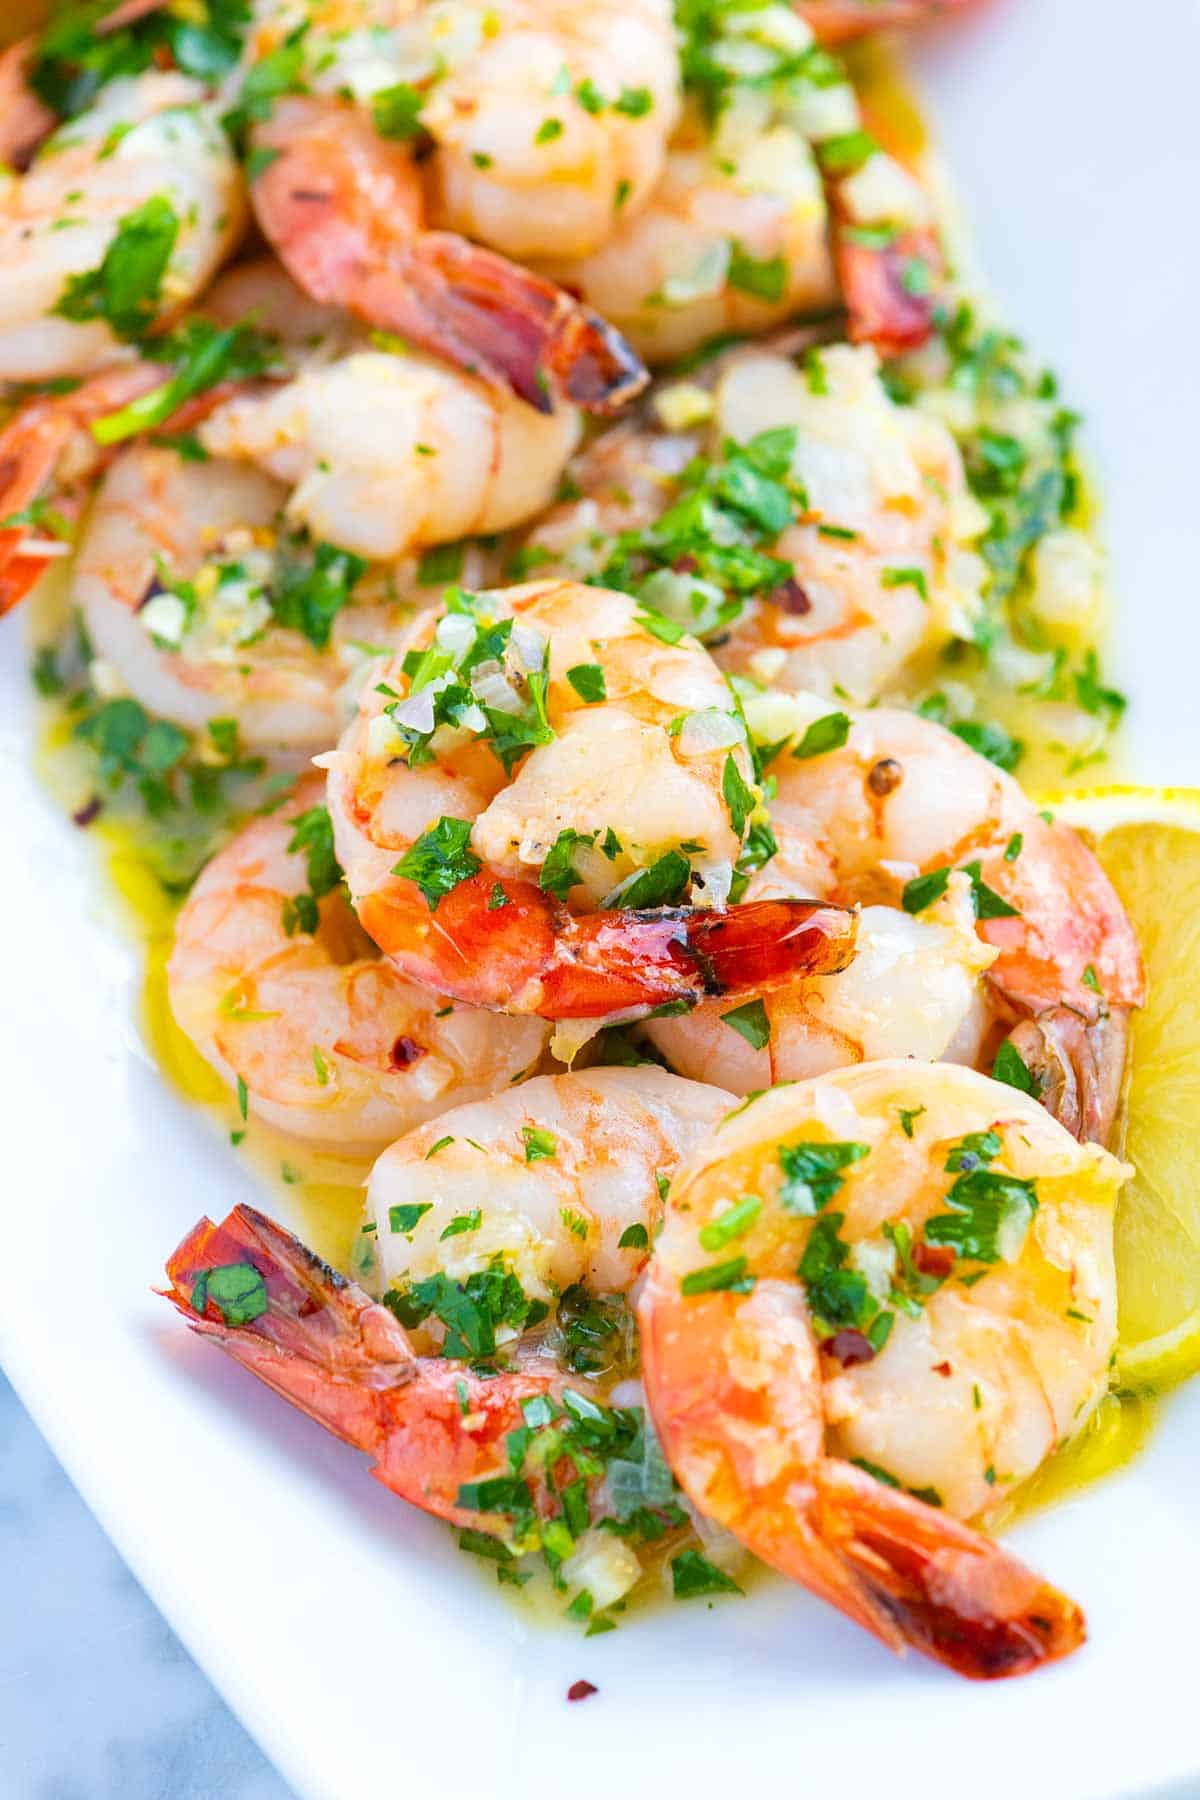 Shrimp scampi with a butter garlic sauce